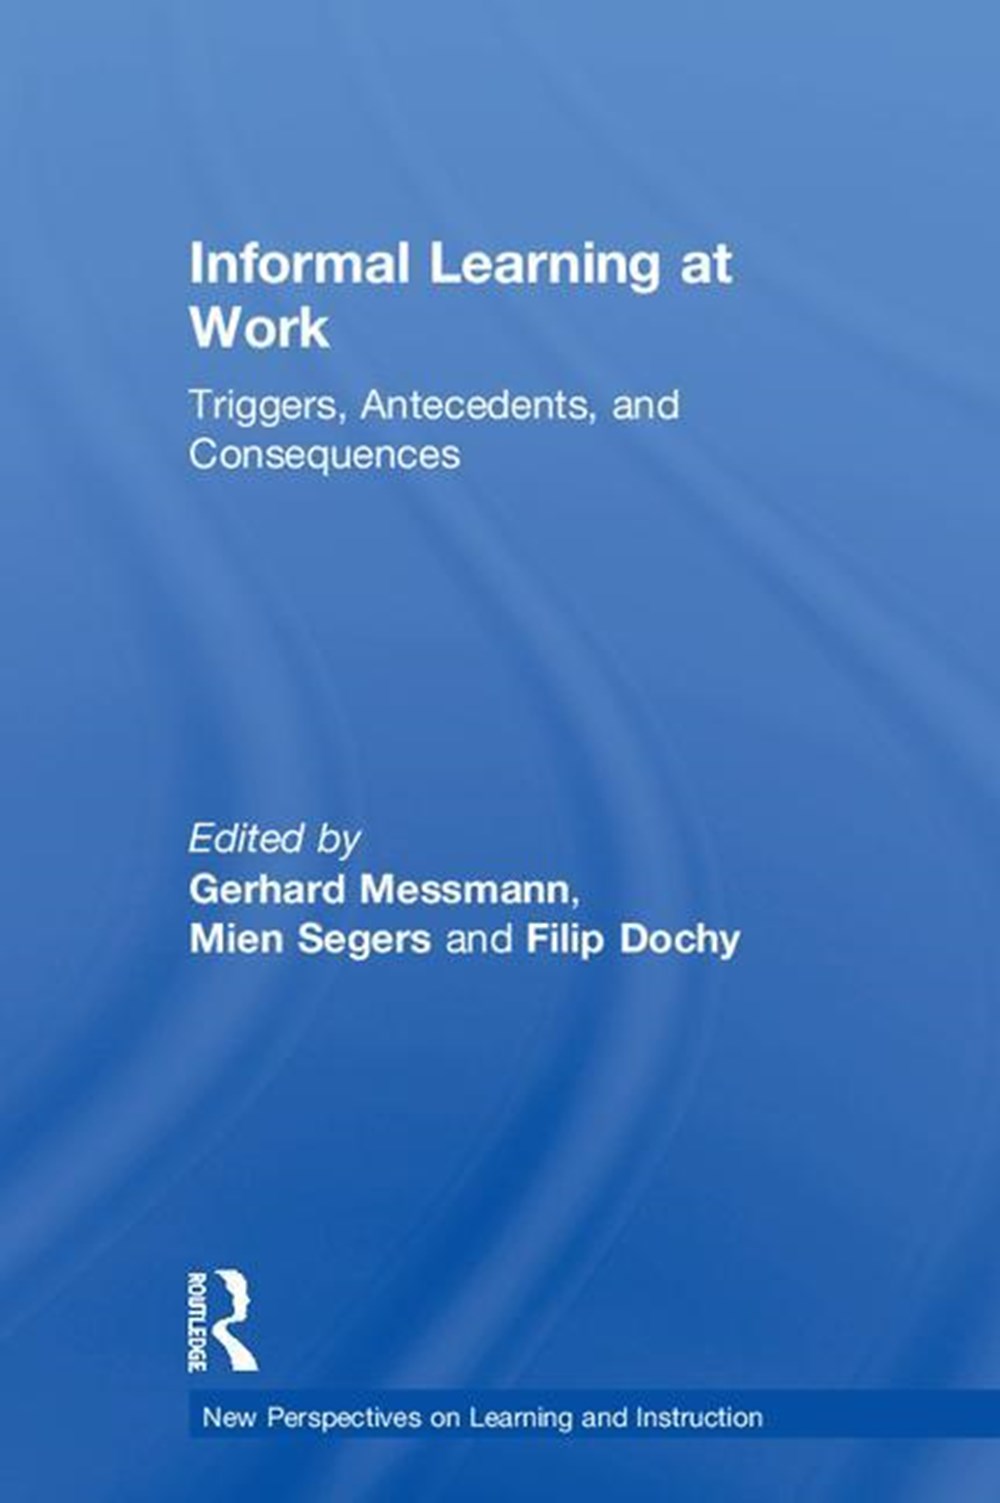 Informal Learning at Work: Triggers, Antecedents, and Consequences